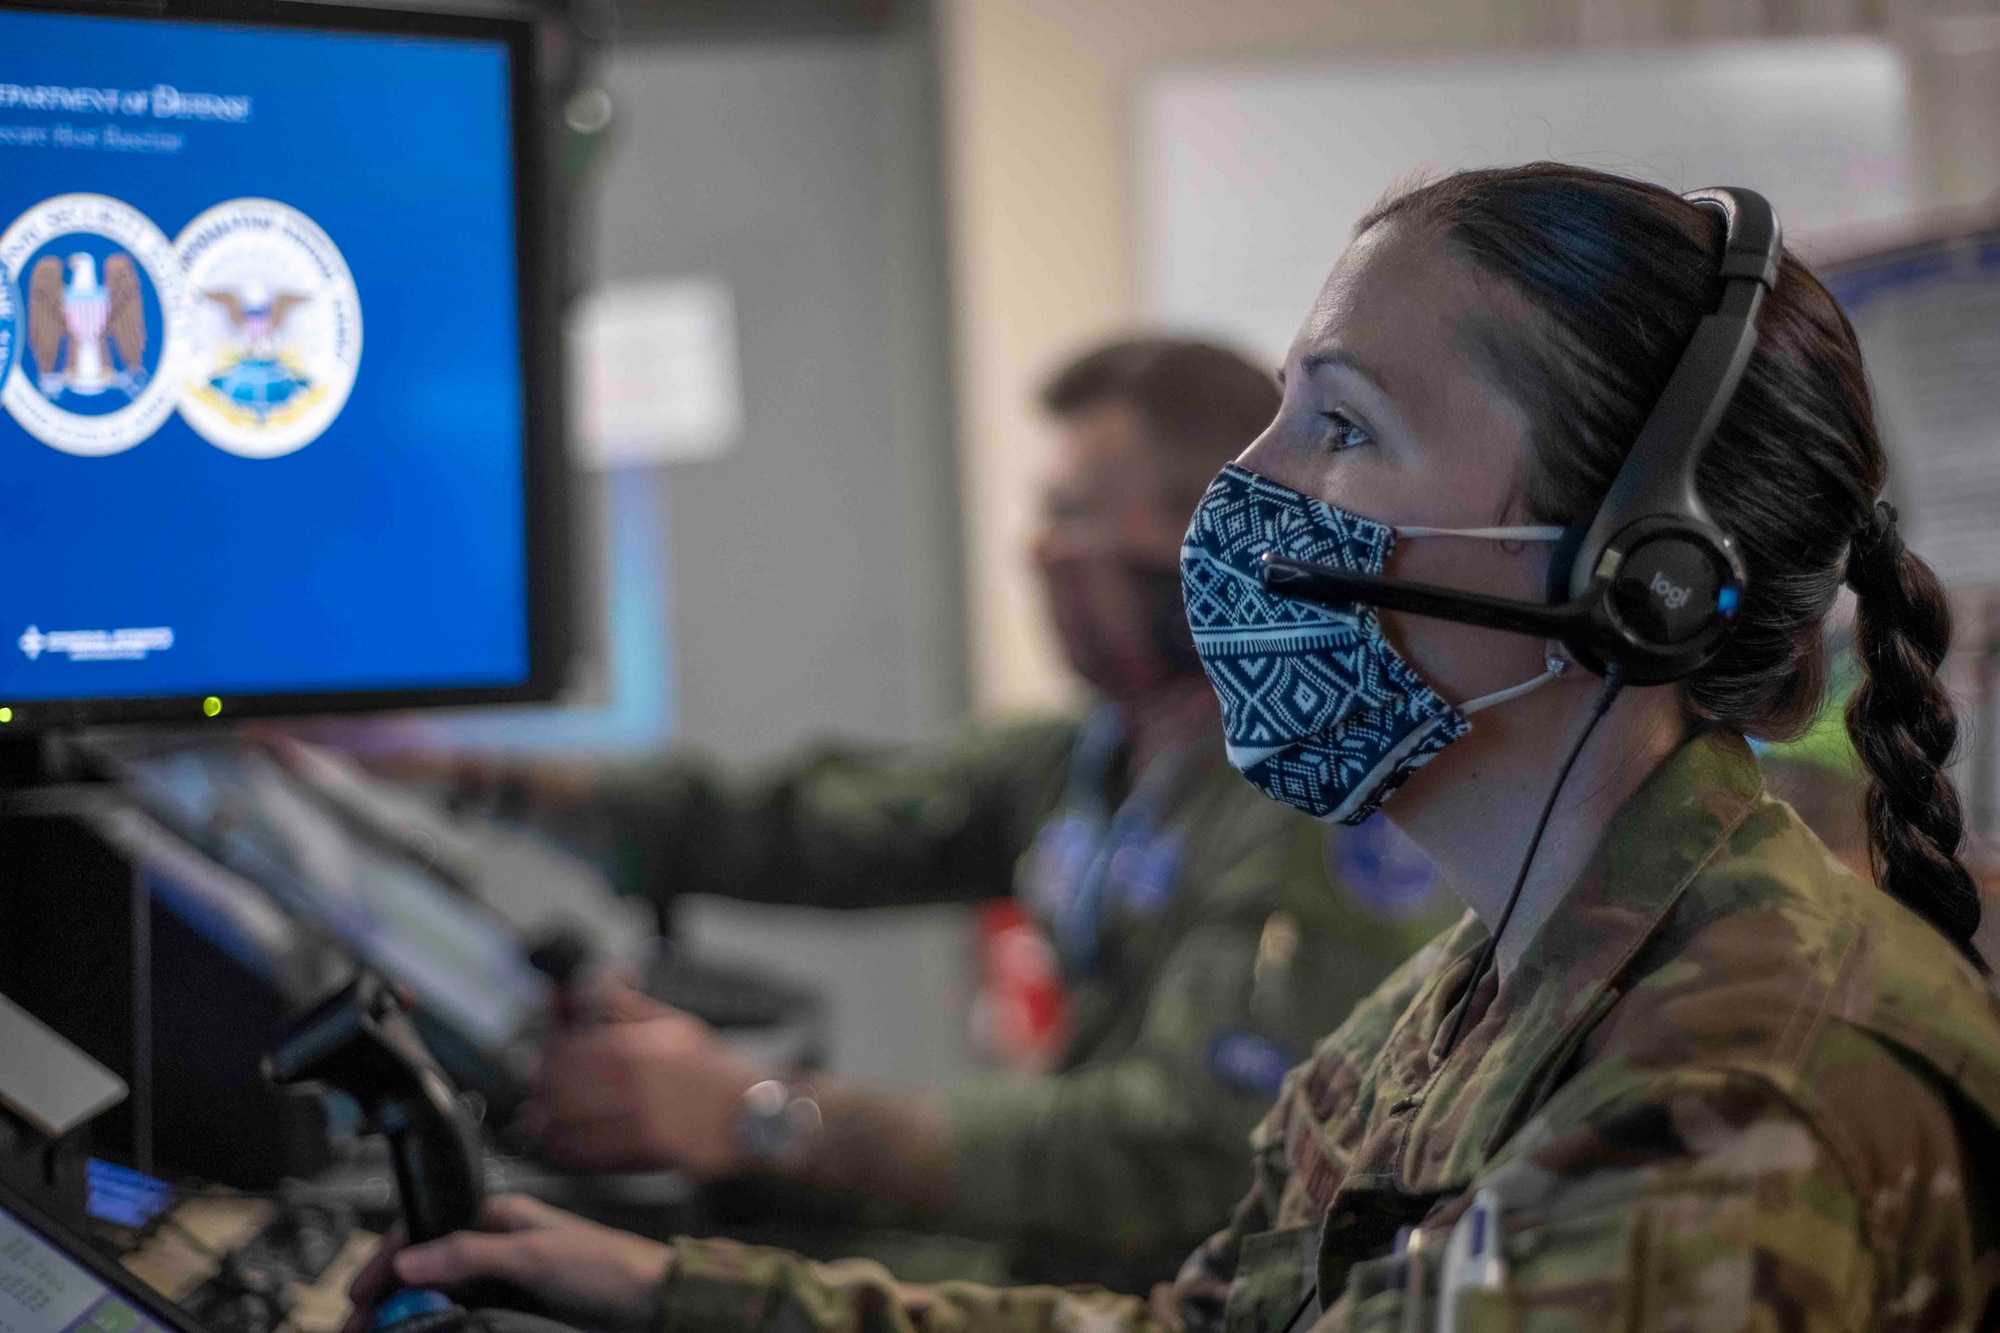 U.S. Air Force Capt. Danielle ‘Dani’ Pavone, 110th Wing remote piloted aircraft pilot, trains on the MQ-9 simulator at the Battle Creek Air National Guard Base, Battle Creek Michigan, February 25, 2021. Pavone is the first ever female remote piloted aircraft pilot in the Michigan Air National Guard. (U.S. Air National Guard photo by Staff Sgt. Bethany Rizor)